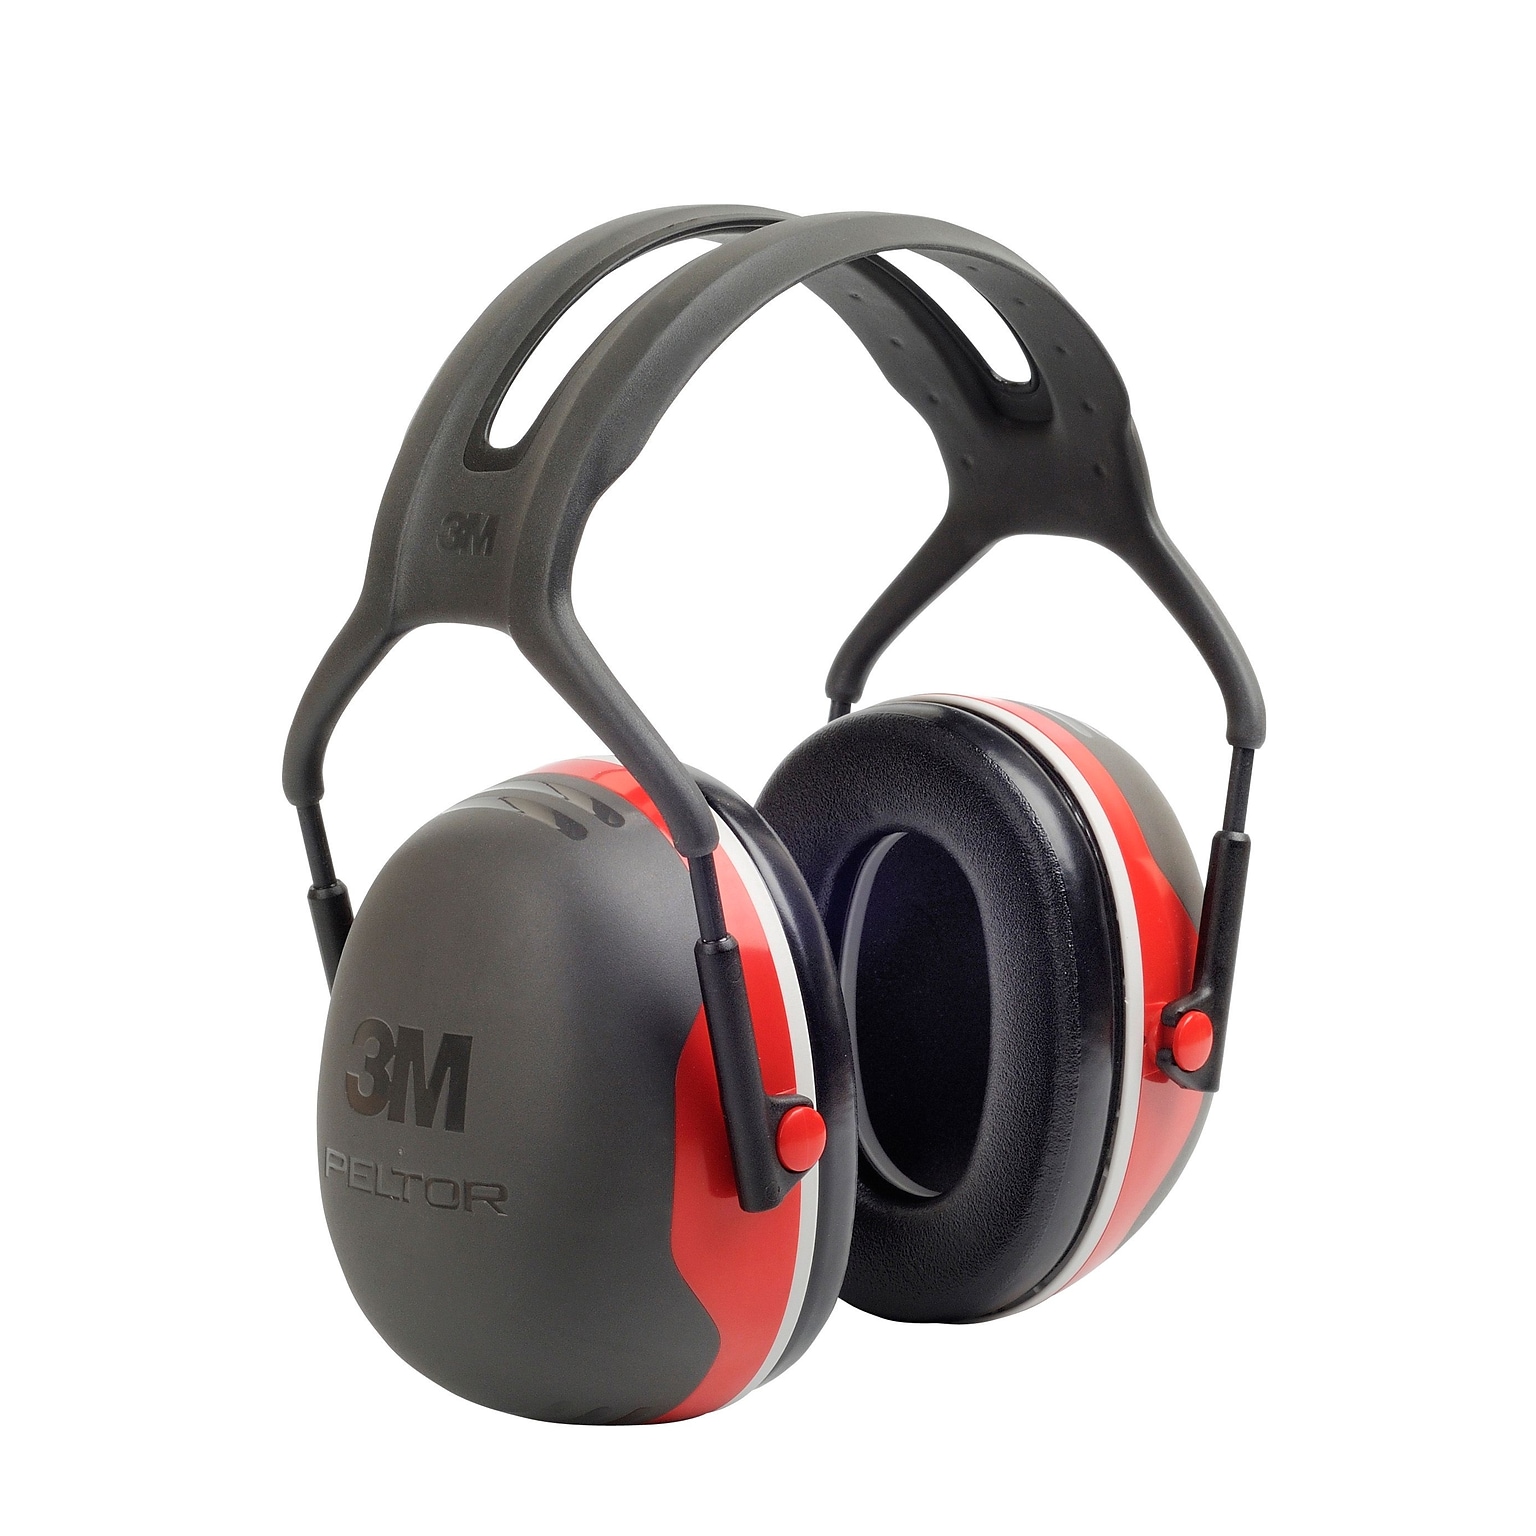 3M Occupational Health & Env Safety Over-the-Head Earmuffs Black & Red Each (665511181)